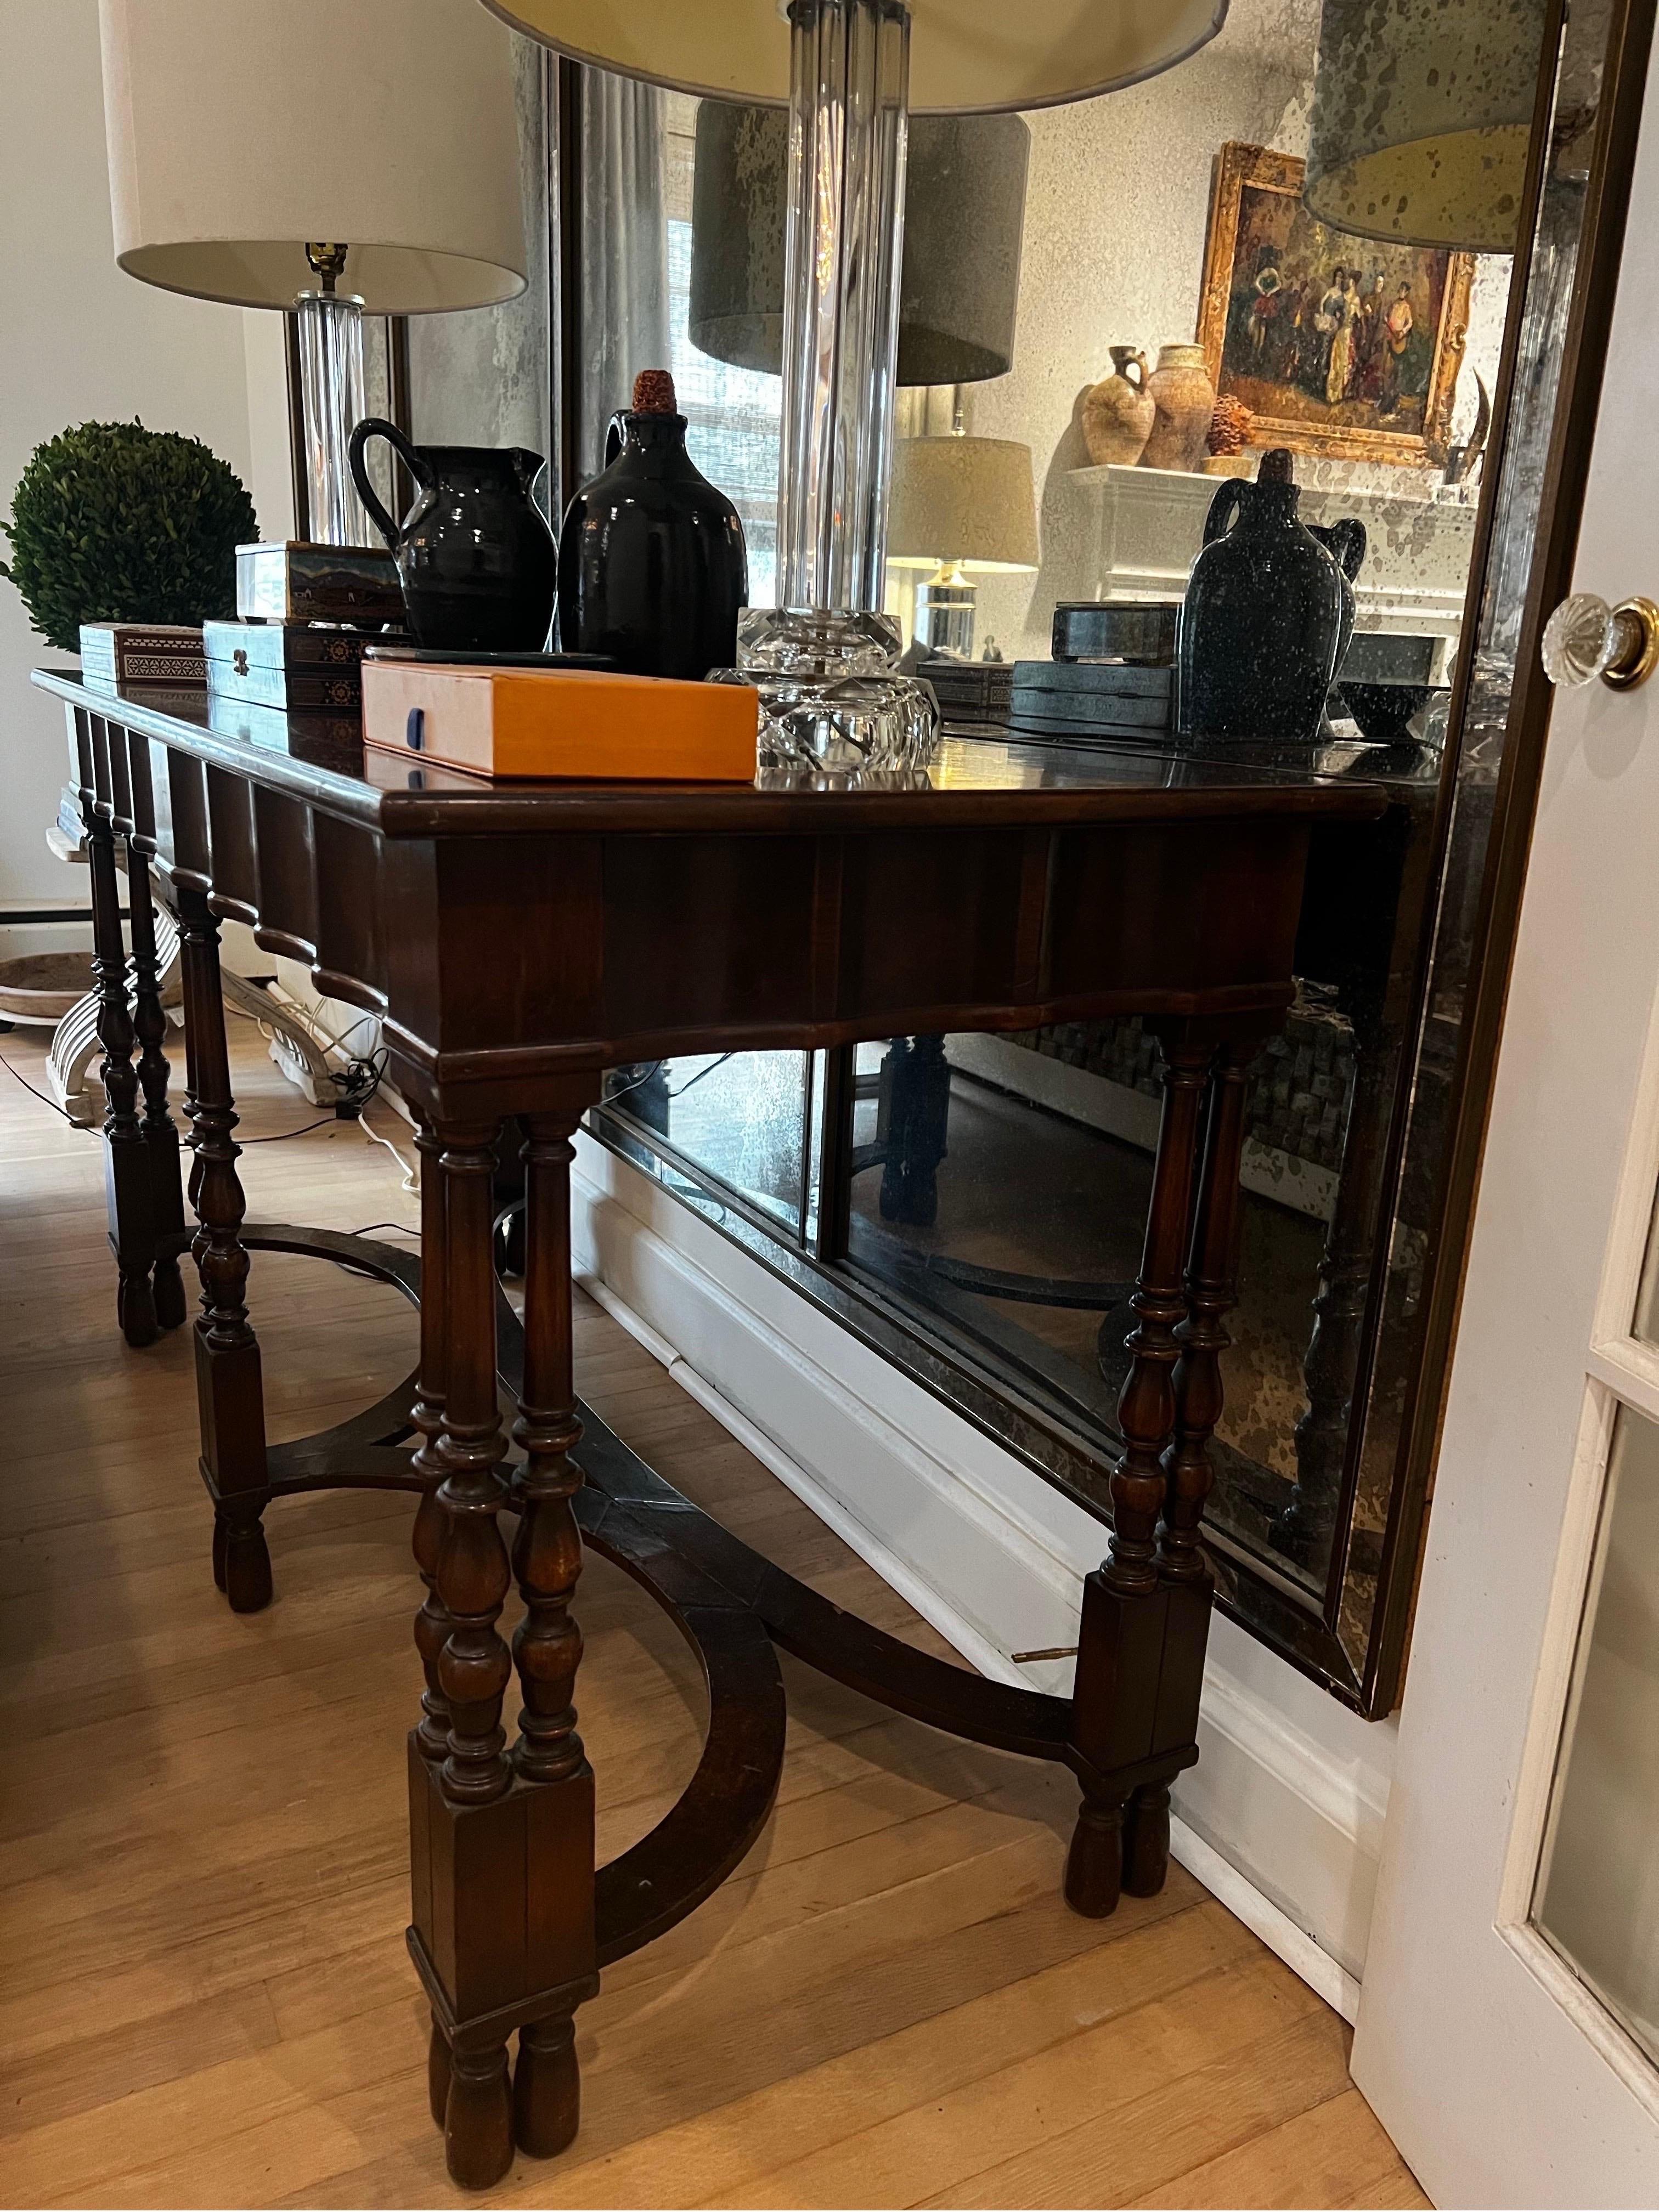 Antique Library/Console Table made by W. & J. Sloane The Company of Mastercraftsmen in the early 1900's. They provided high end pieces for places such as the White House and the Vanderbilts.  

Exotic burled wood veneer inlay on top.  Carved spindle